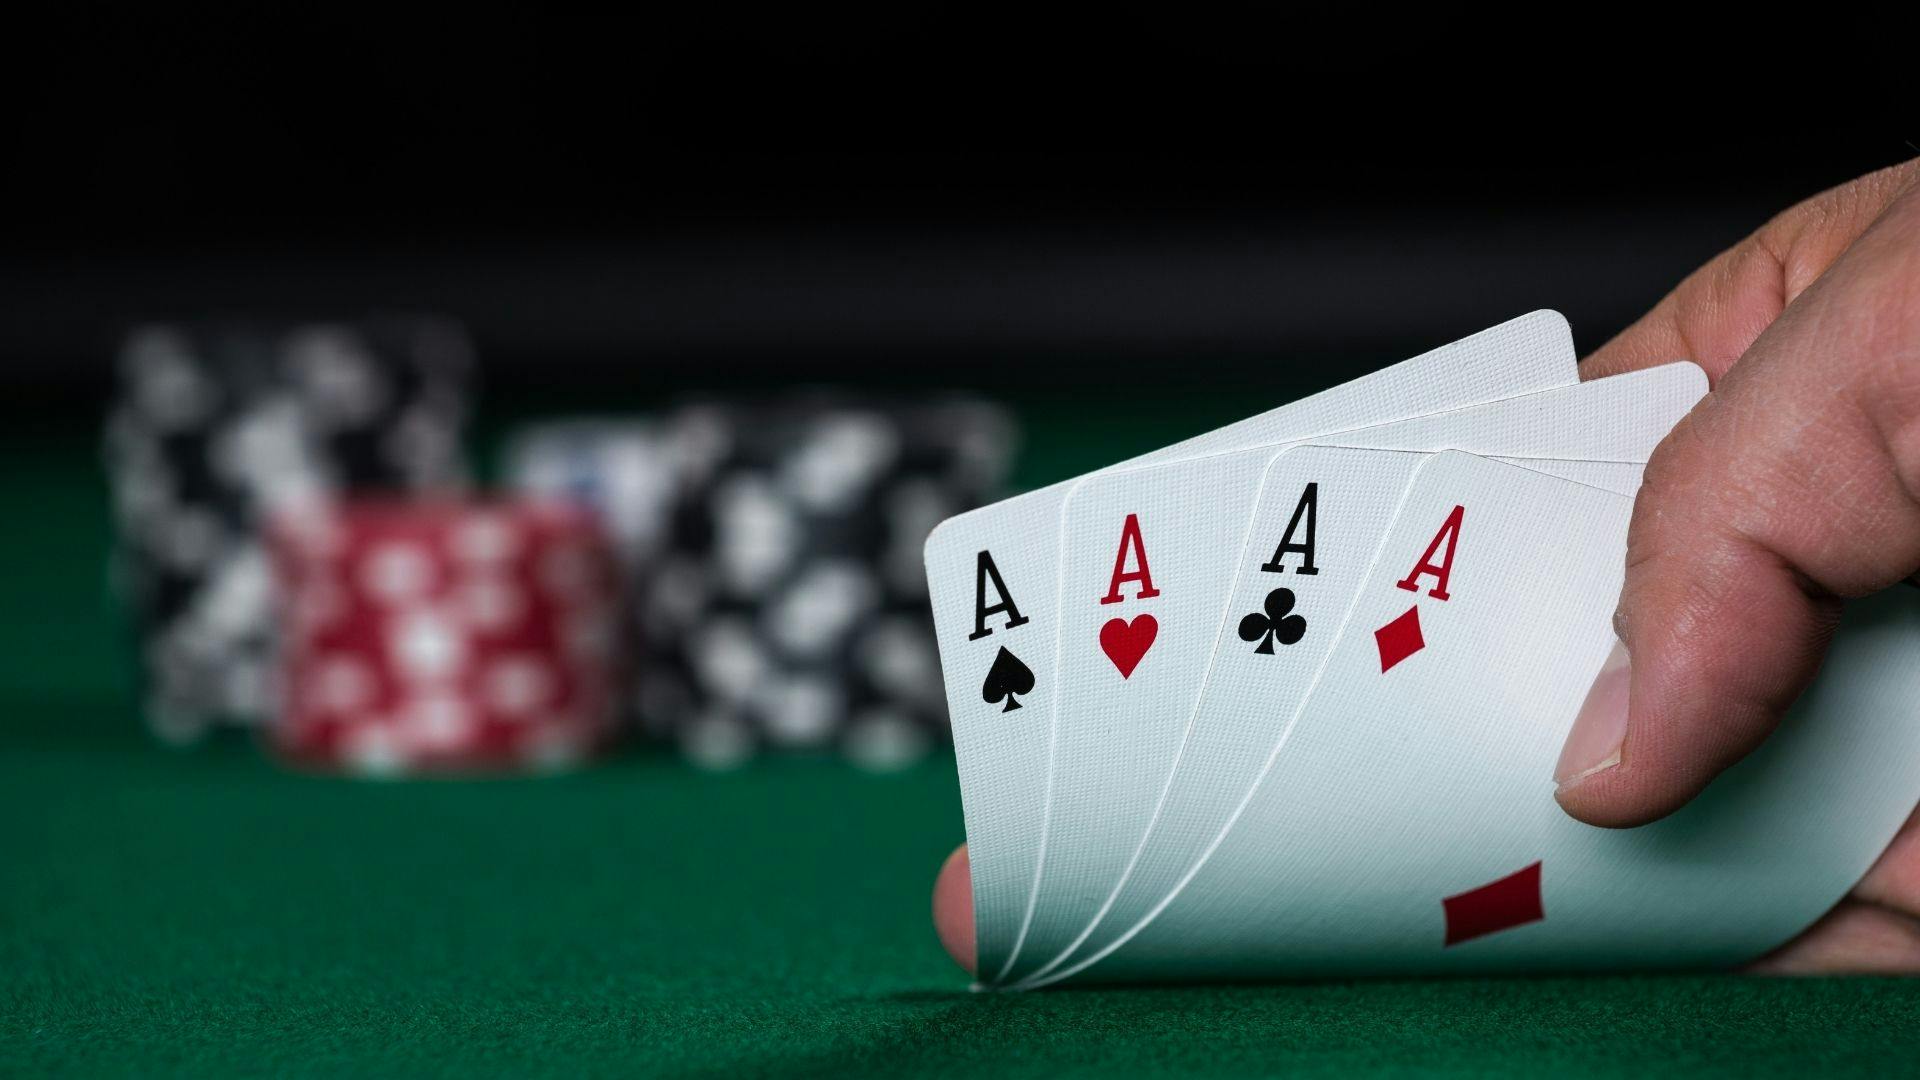 A poker hand of four Aces